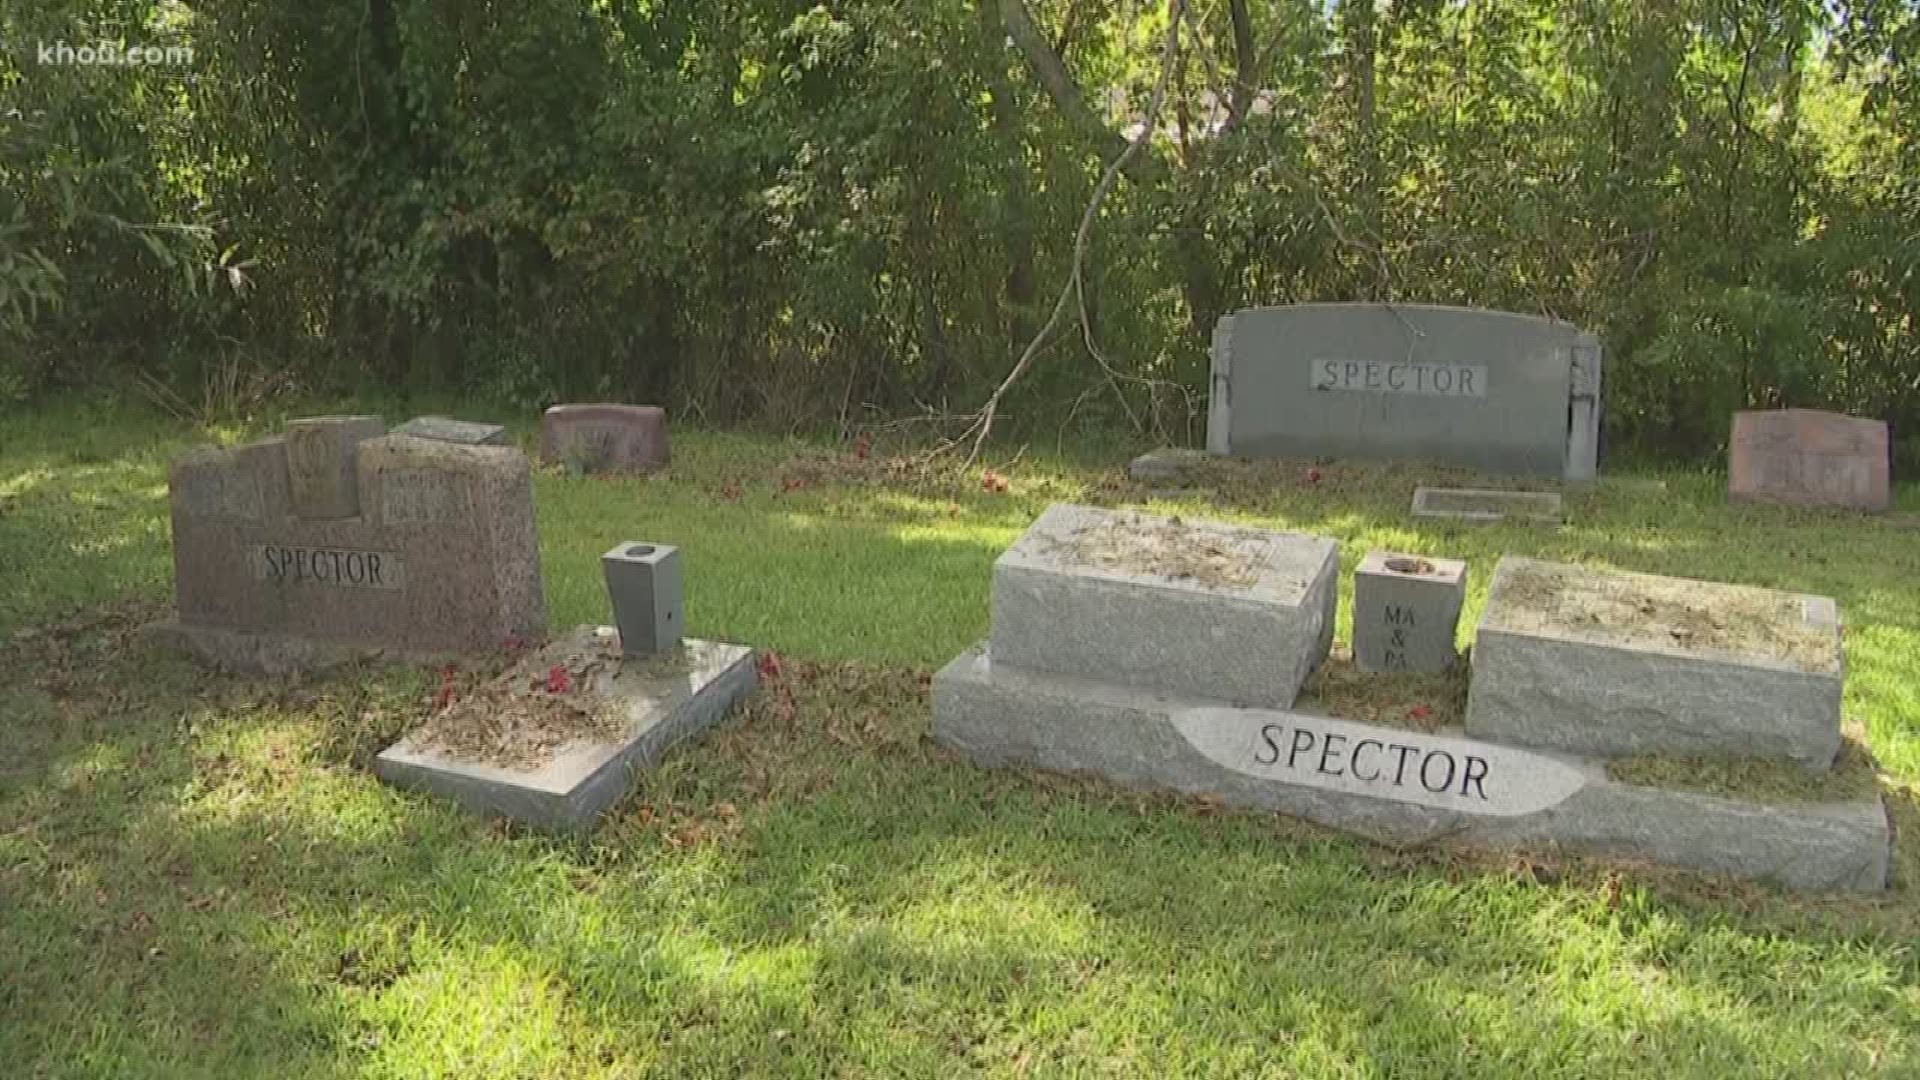 Police are investigating vandalism at a small Jewish cemetery in Southeast Texas.